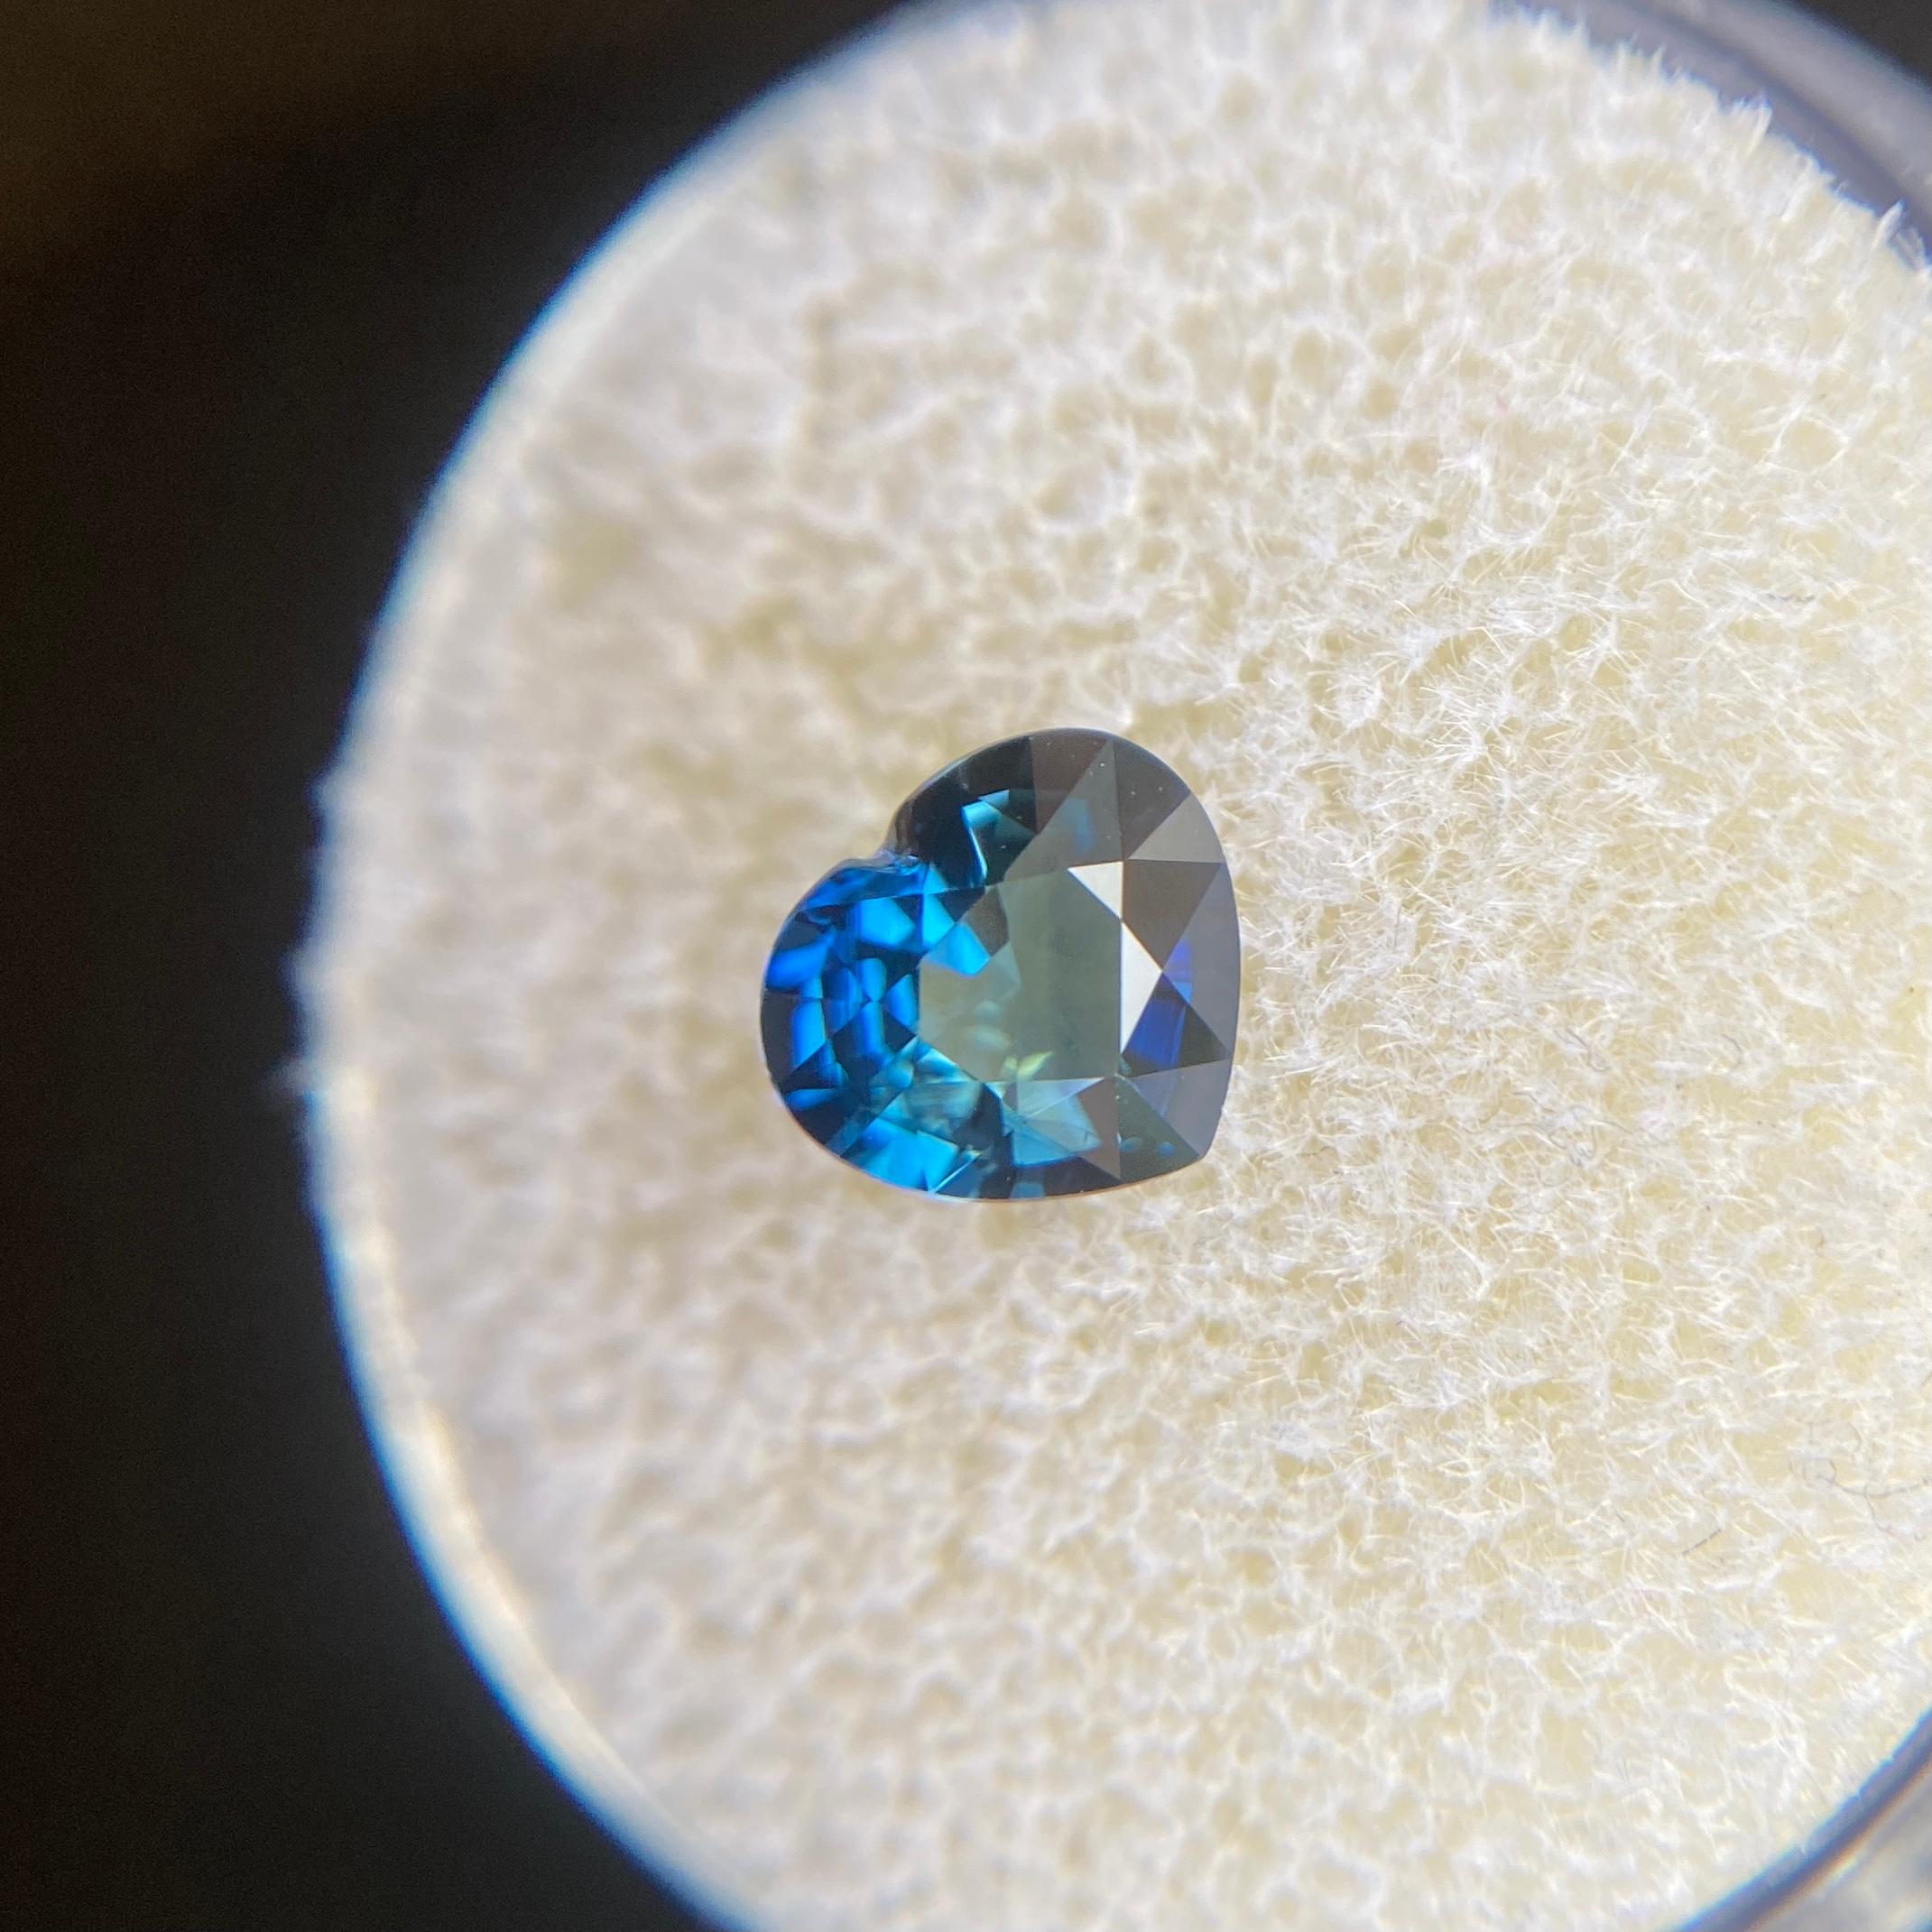 Natural Australian Vivid Blue Sapphire Gemstone.

1.19 Carat with a beautiful vivid blue colour and excellent clarity, a very clean stone. Also has an excellent heart cut and ideal polish to show great shine and colour, would look lovely in